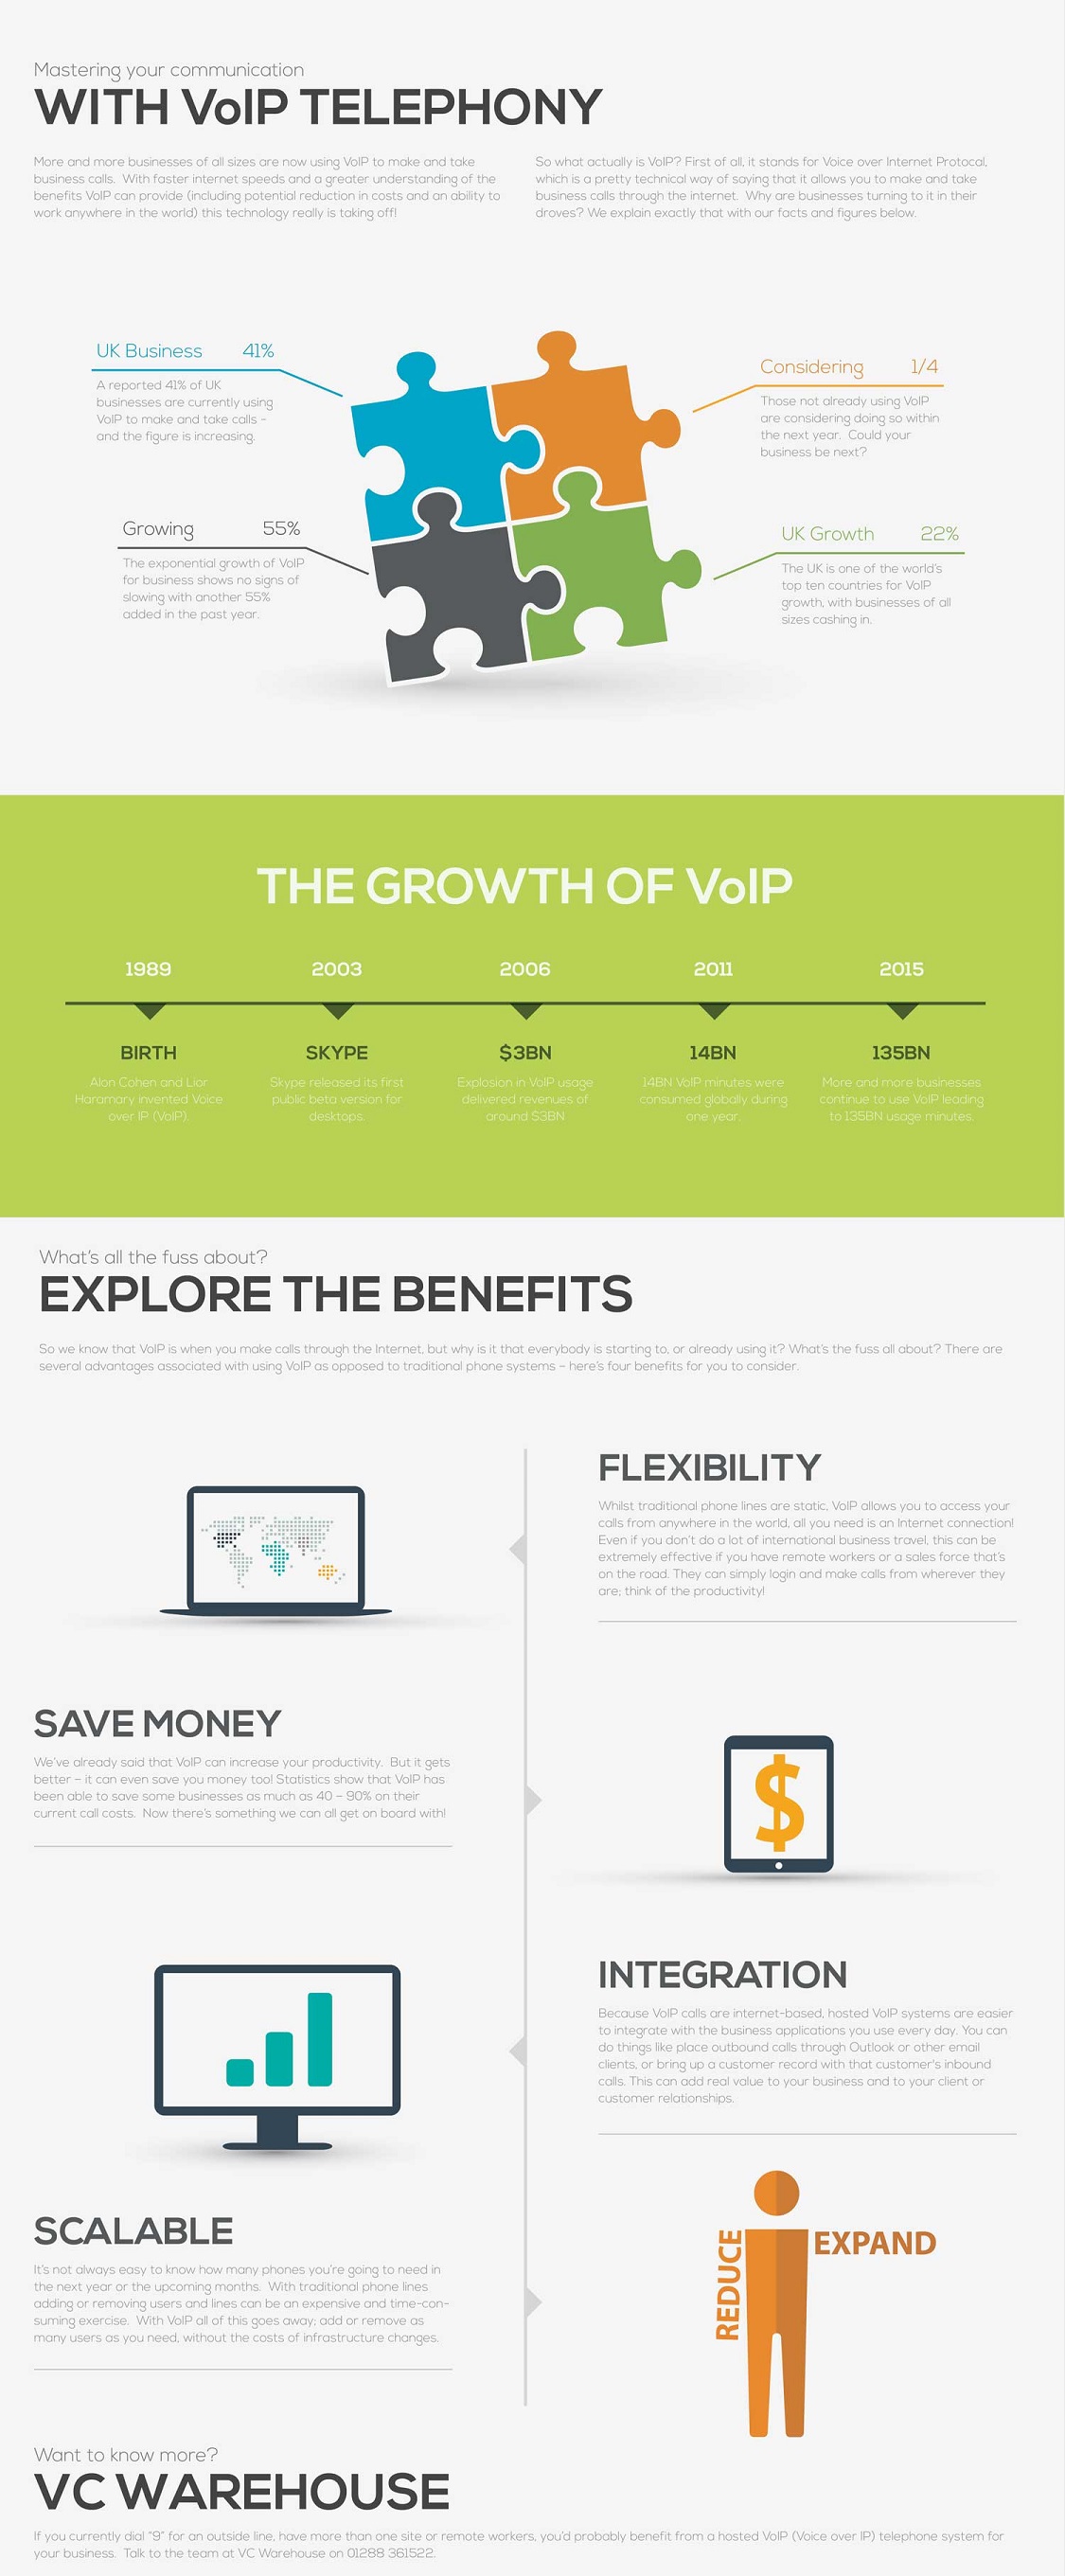 Top Benefits of VoIP Telephony infographic